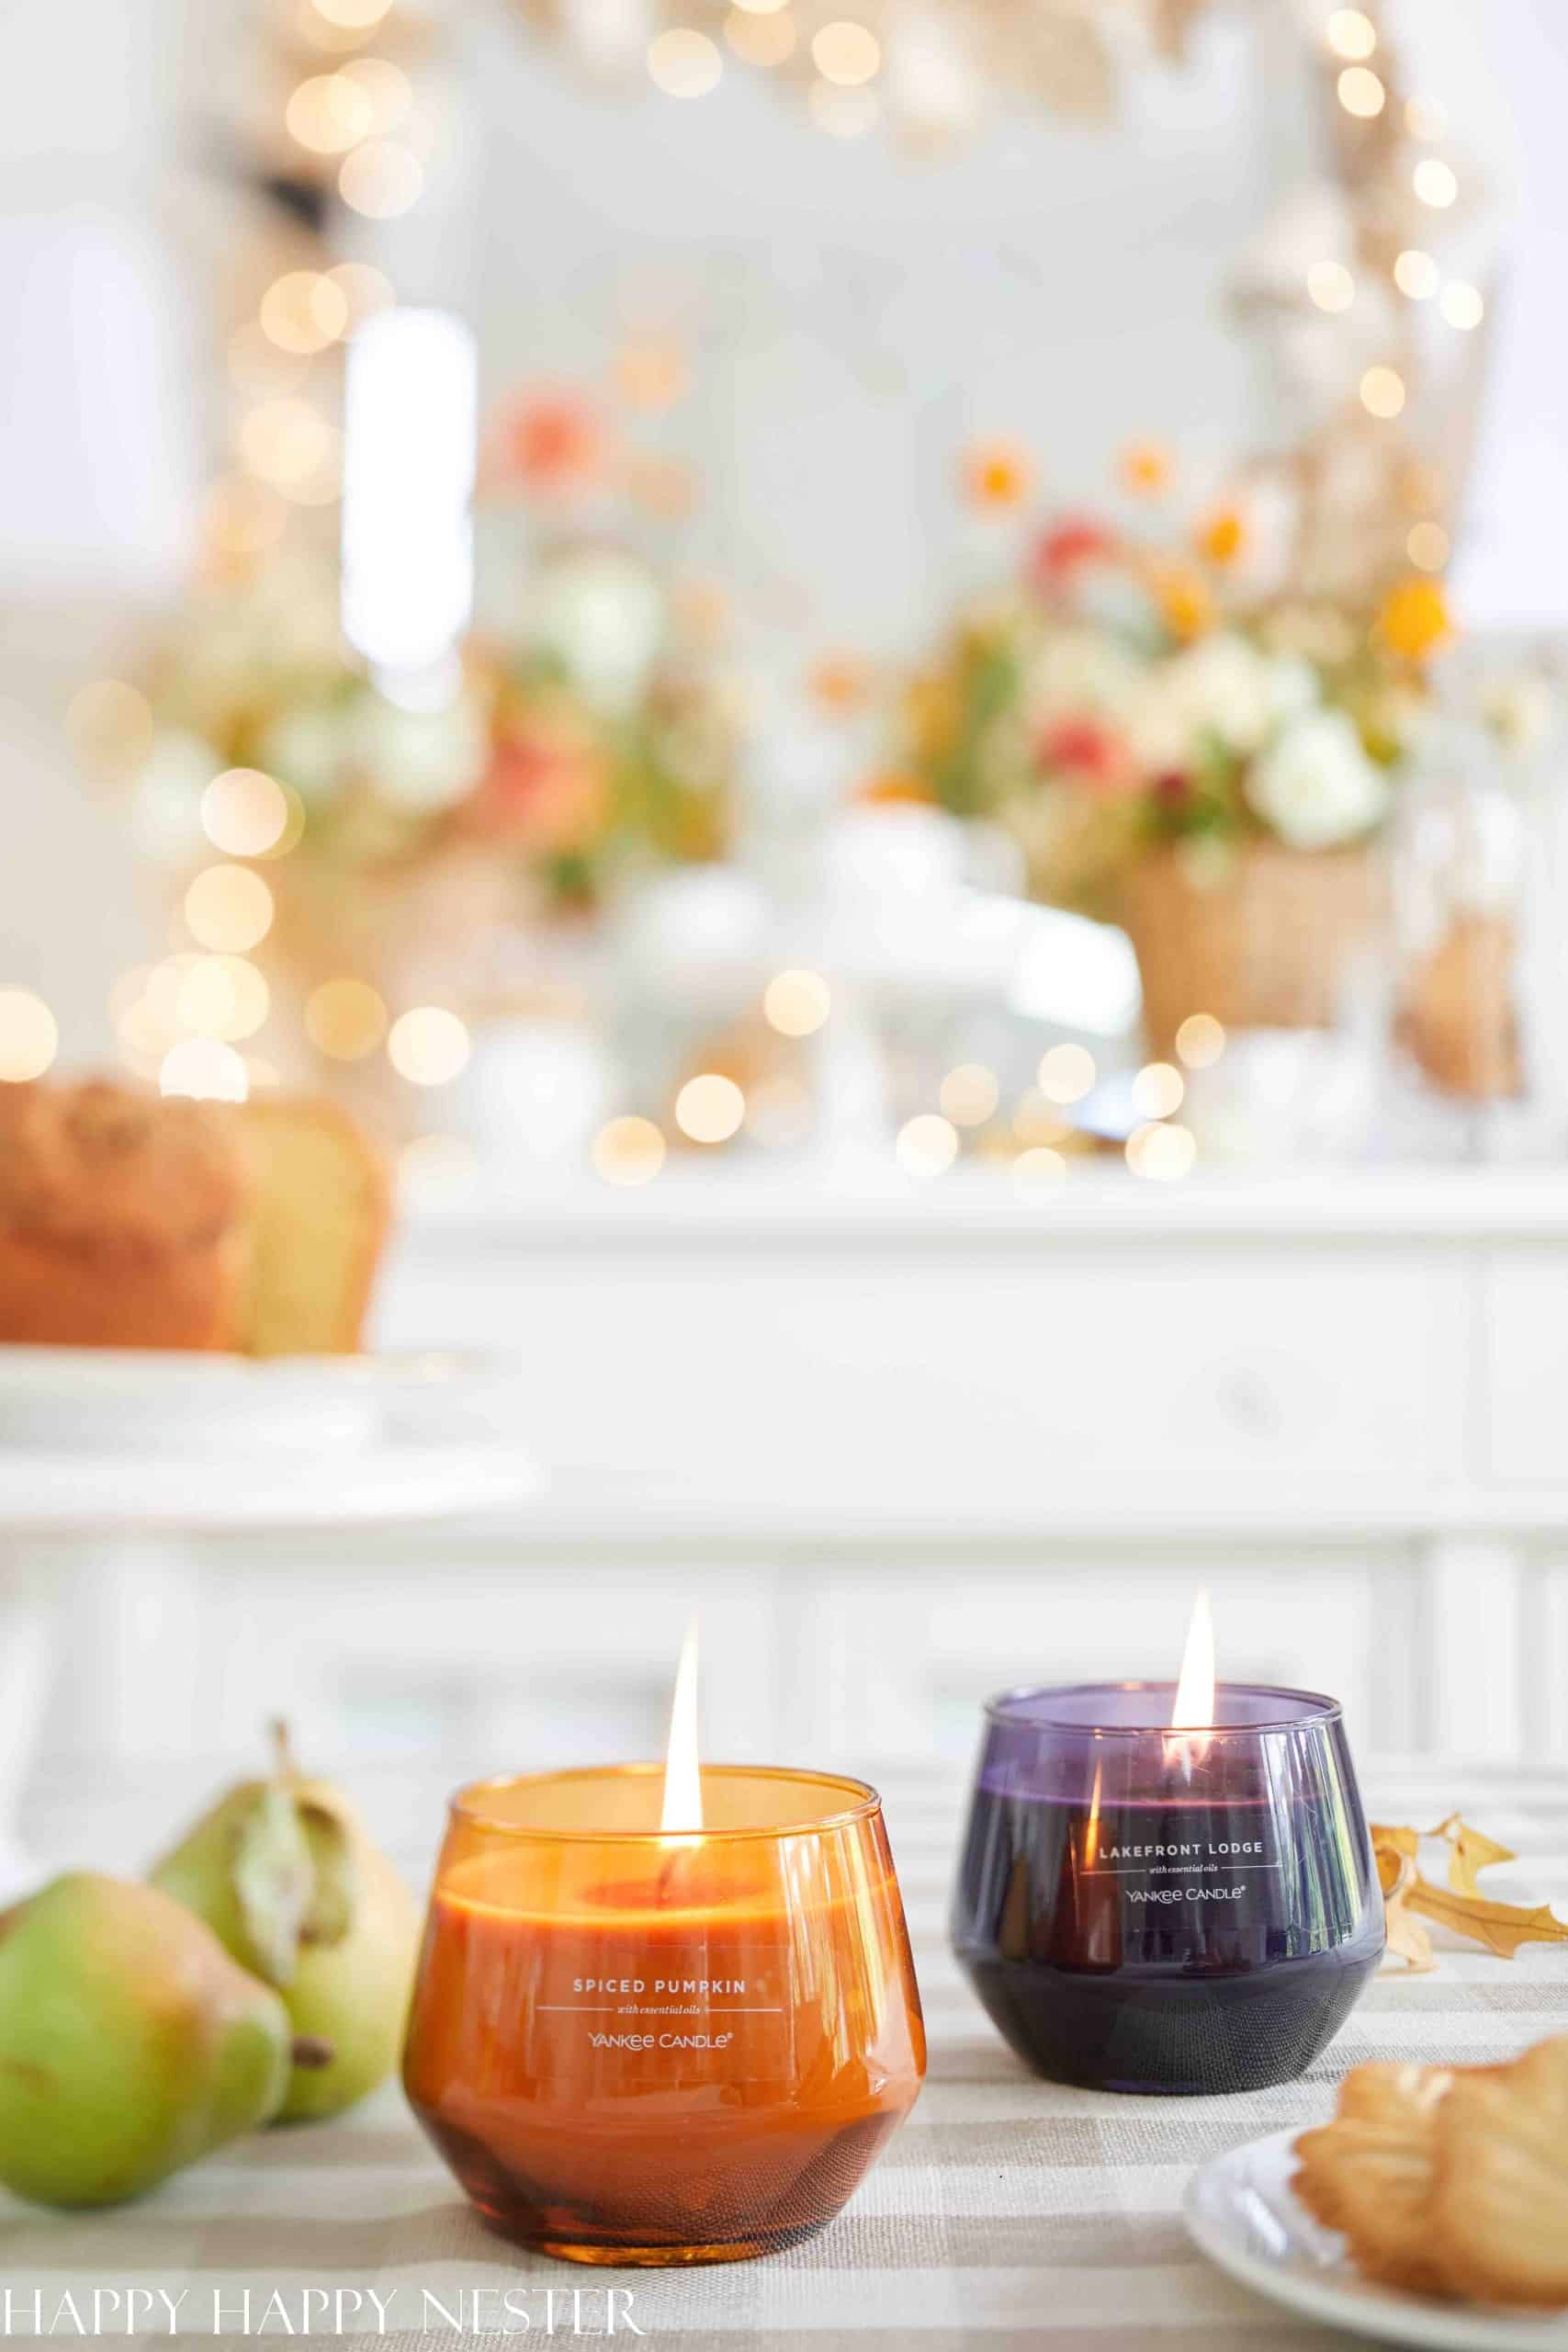 Fall- and holiday-scented Yankee Candle candles are on sale at